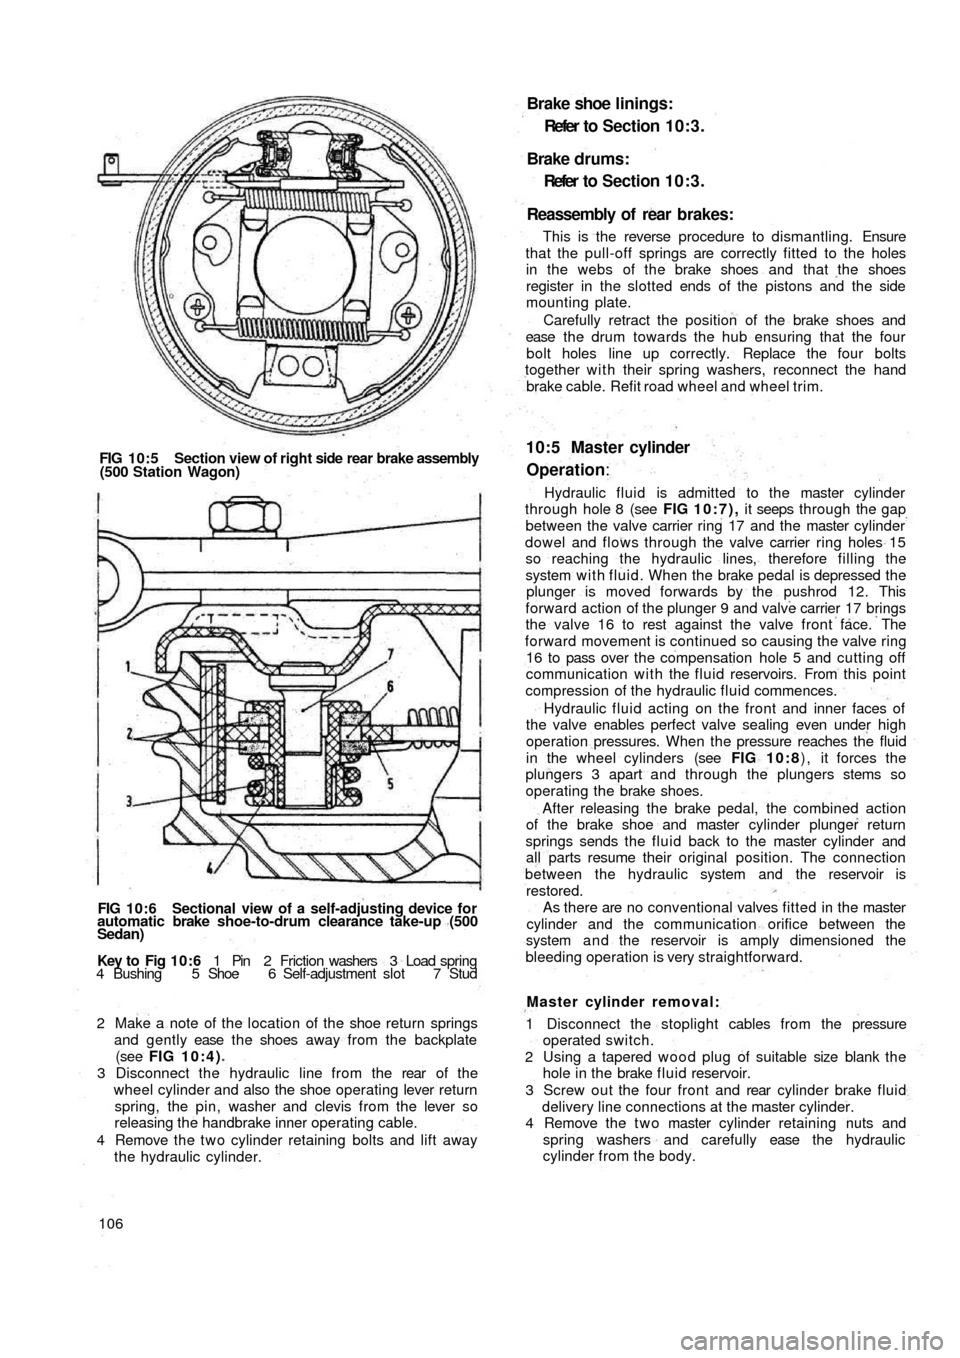 FIAT 500 1969 1.G Workshop Manual FIG 10:5 Section view of right side rear brake assembly
(500 Station Wagon)
FIG 10:6 Sectional view of a self-adjusting device for
automatic brake shoe-to-drum clearance take-up (500
Sedan)
Key  to   